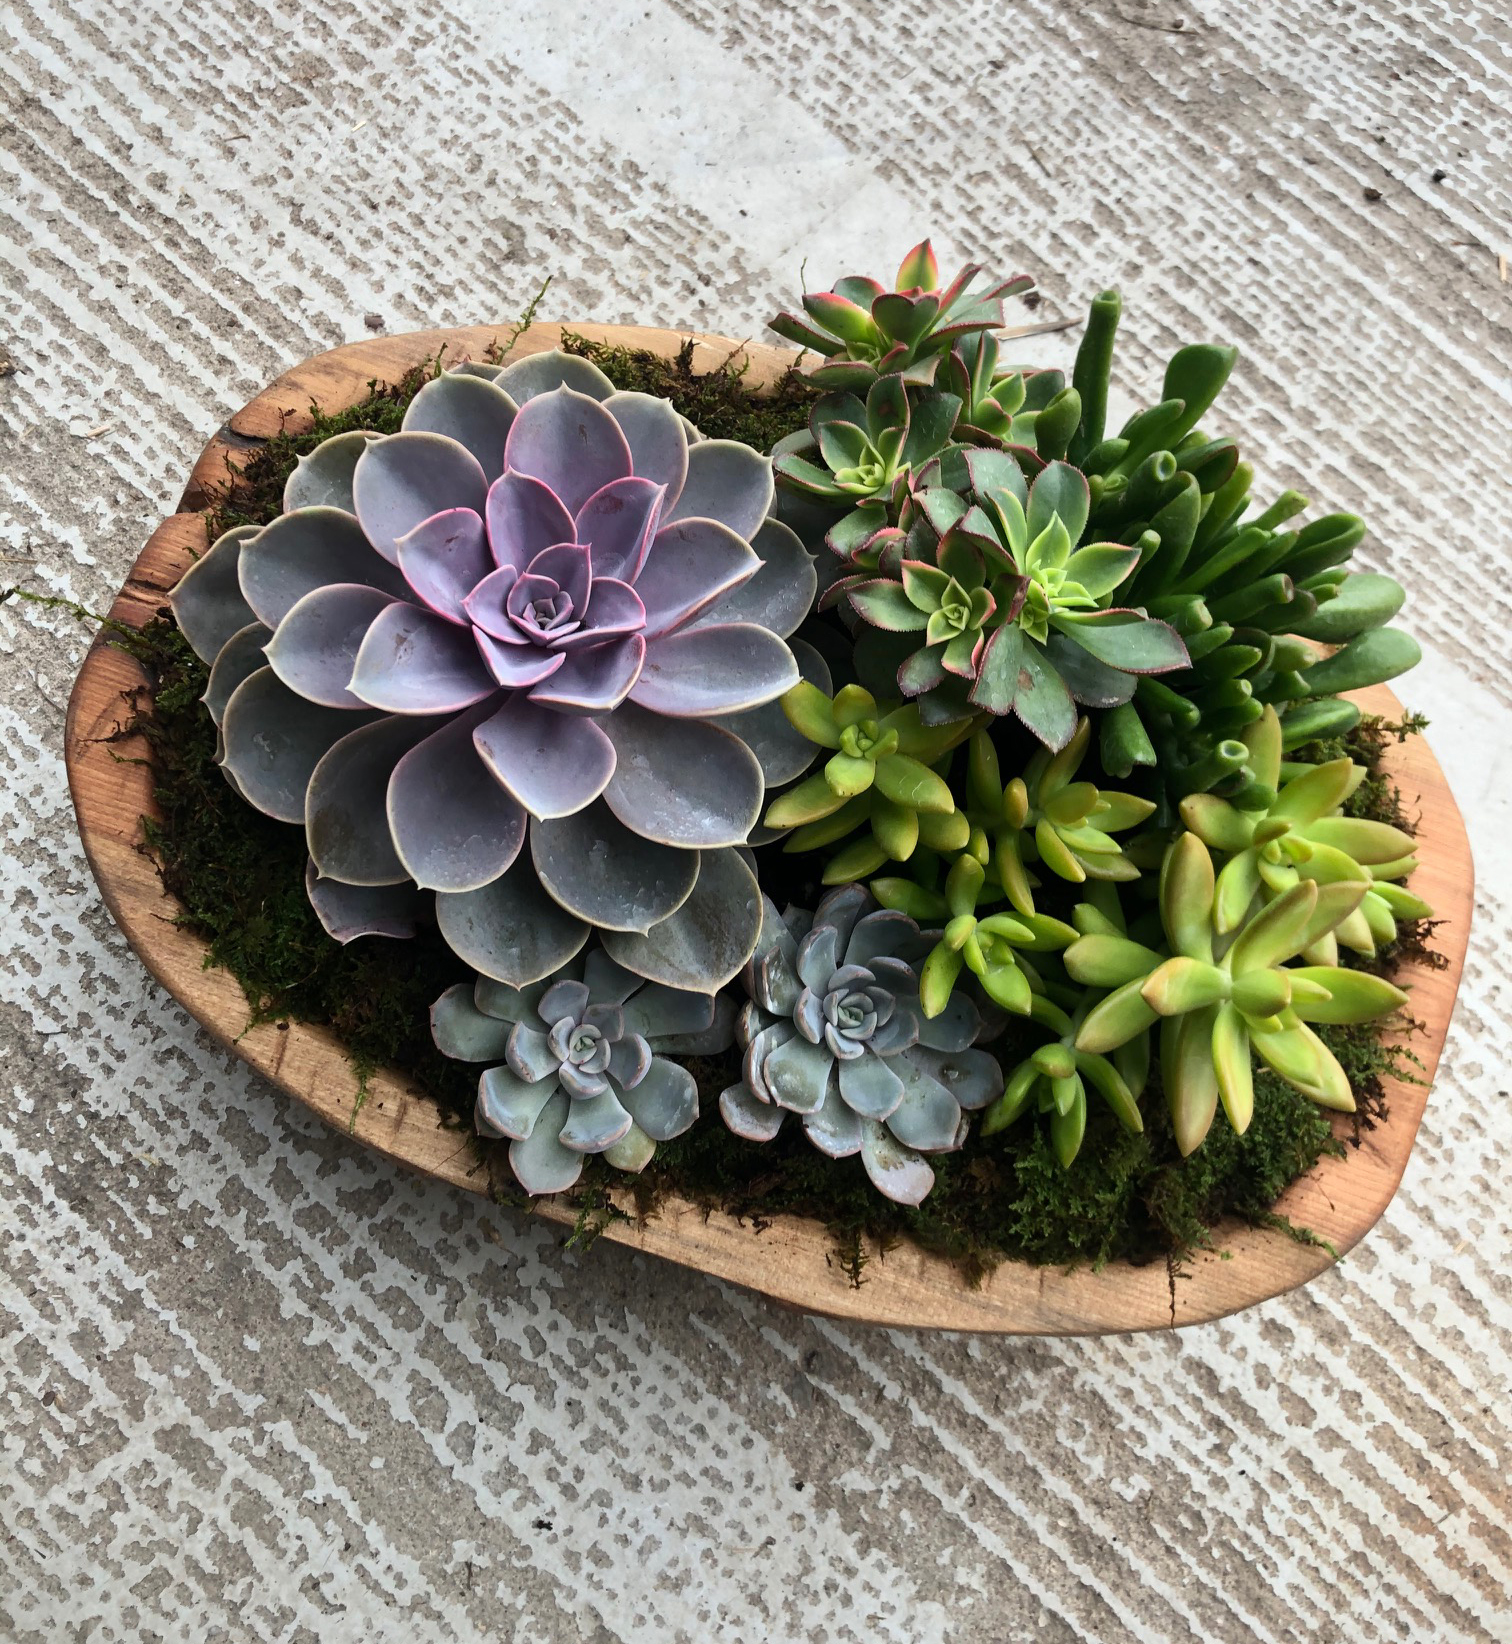 Echeveria needs full sun if planted outside or direct, bright light if used inside. They are not cold tolerant, so bring them inside before the first big frost.